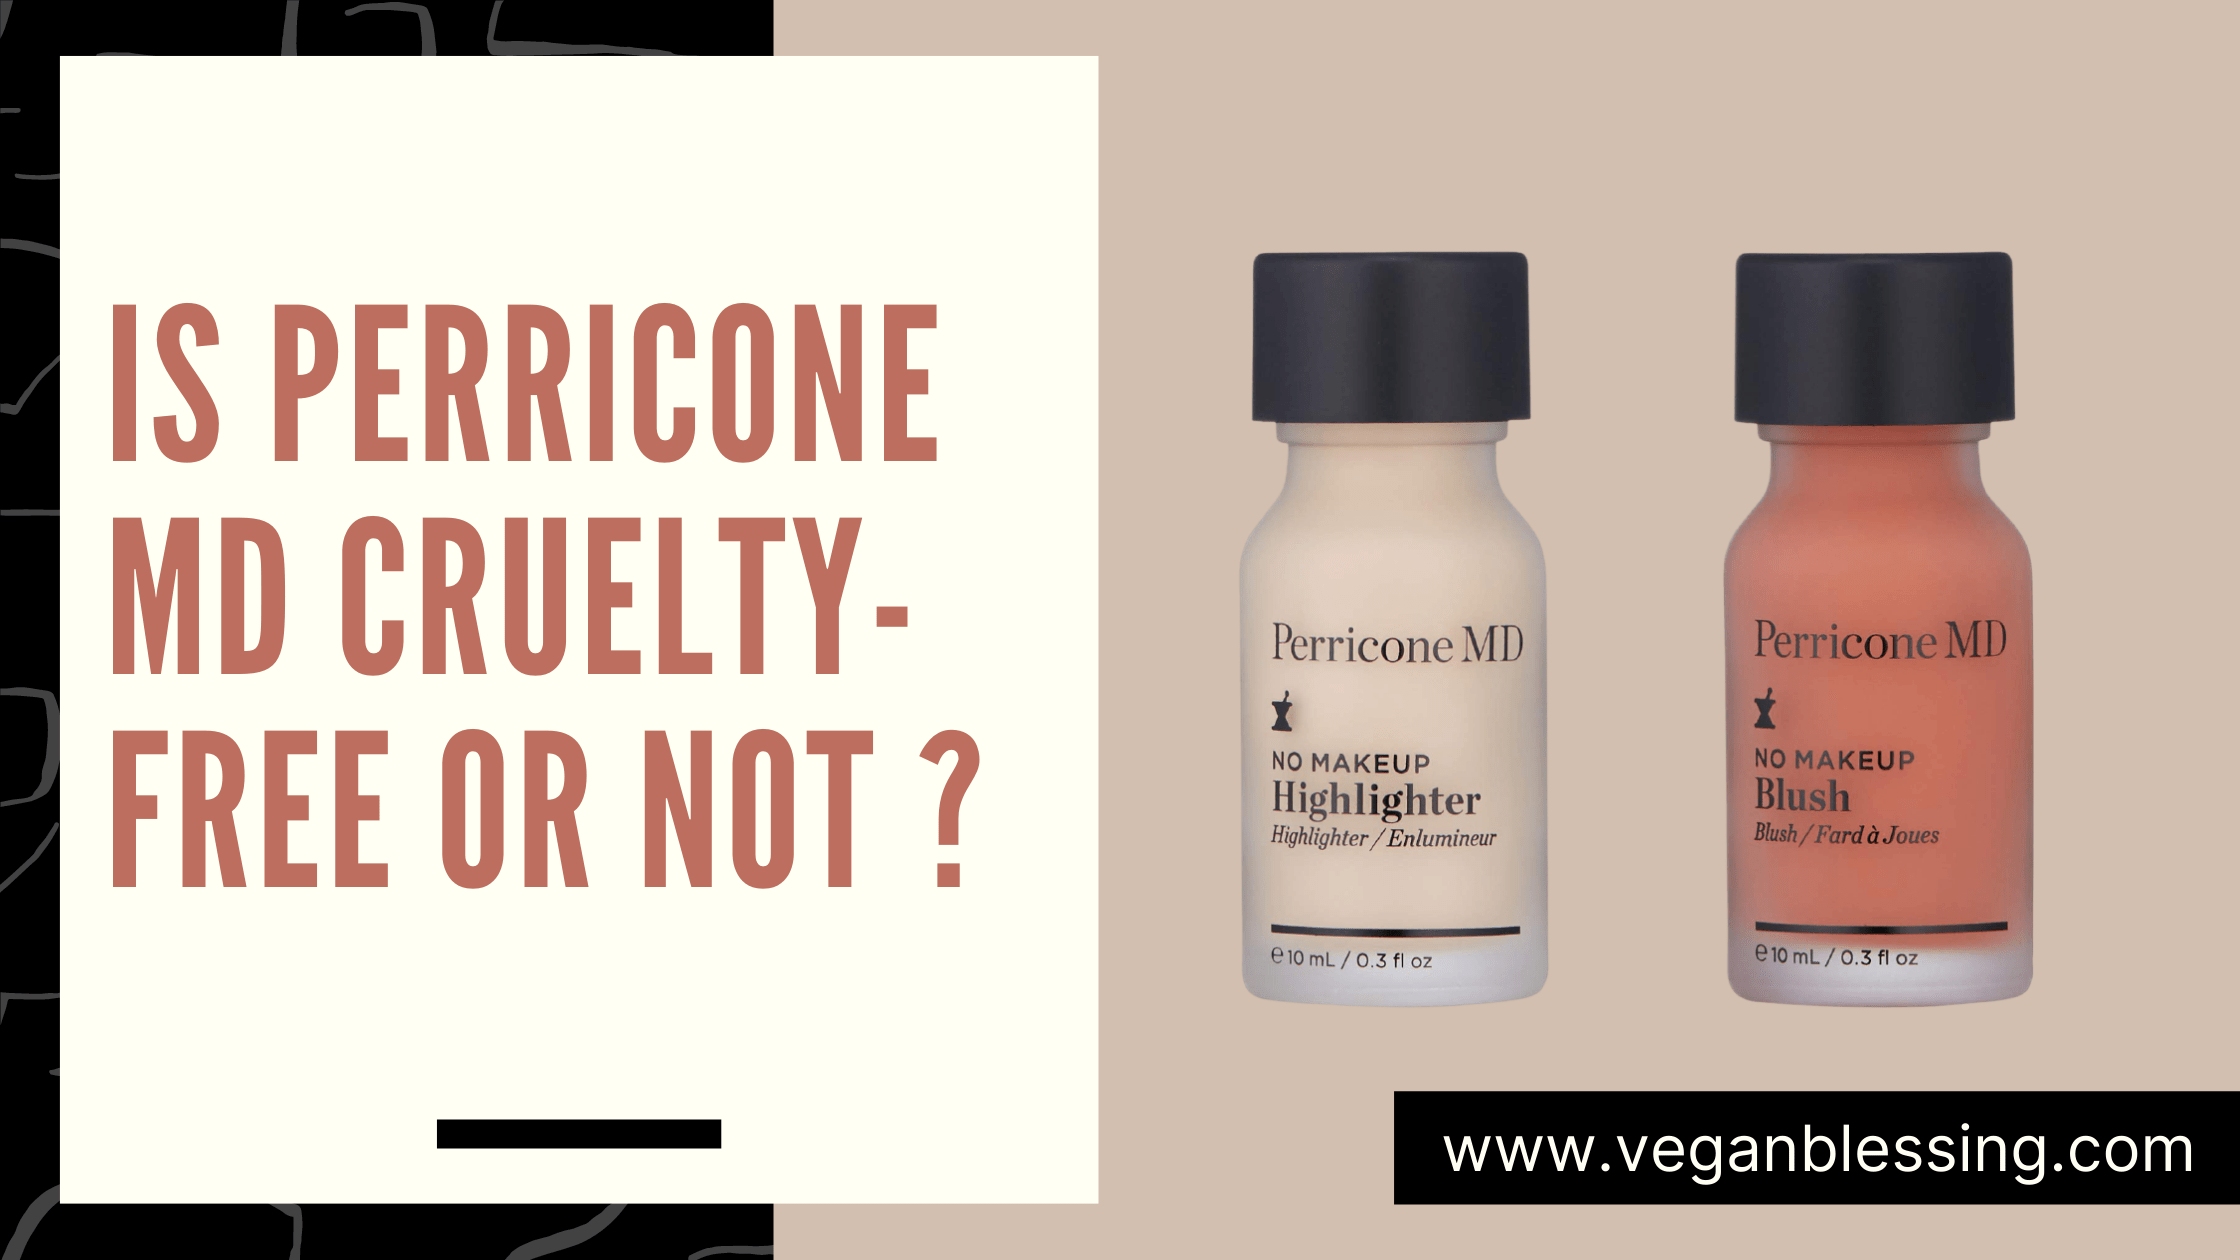 Is Perricone MD Cruelty-Free or Not _ (1)